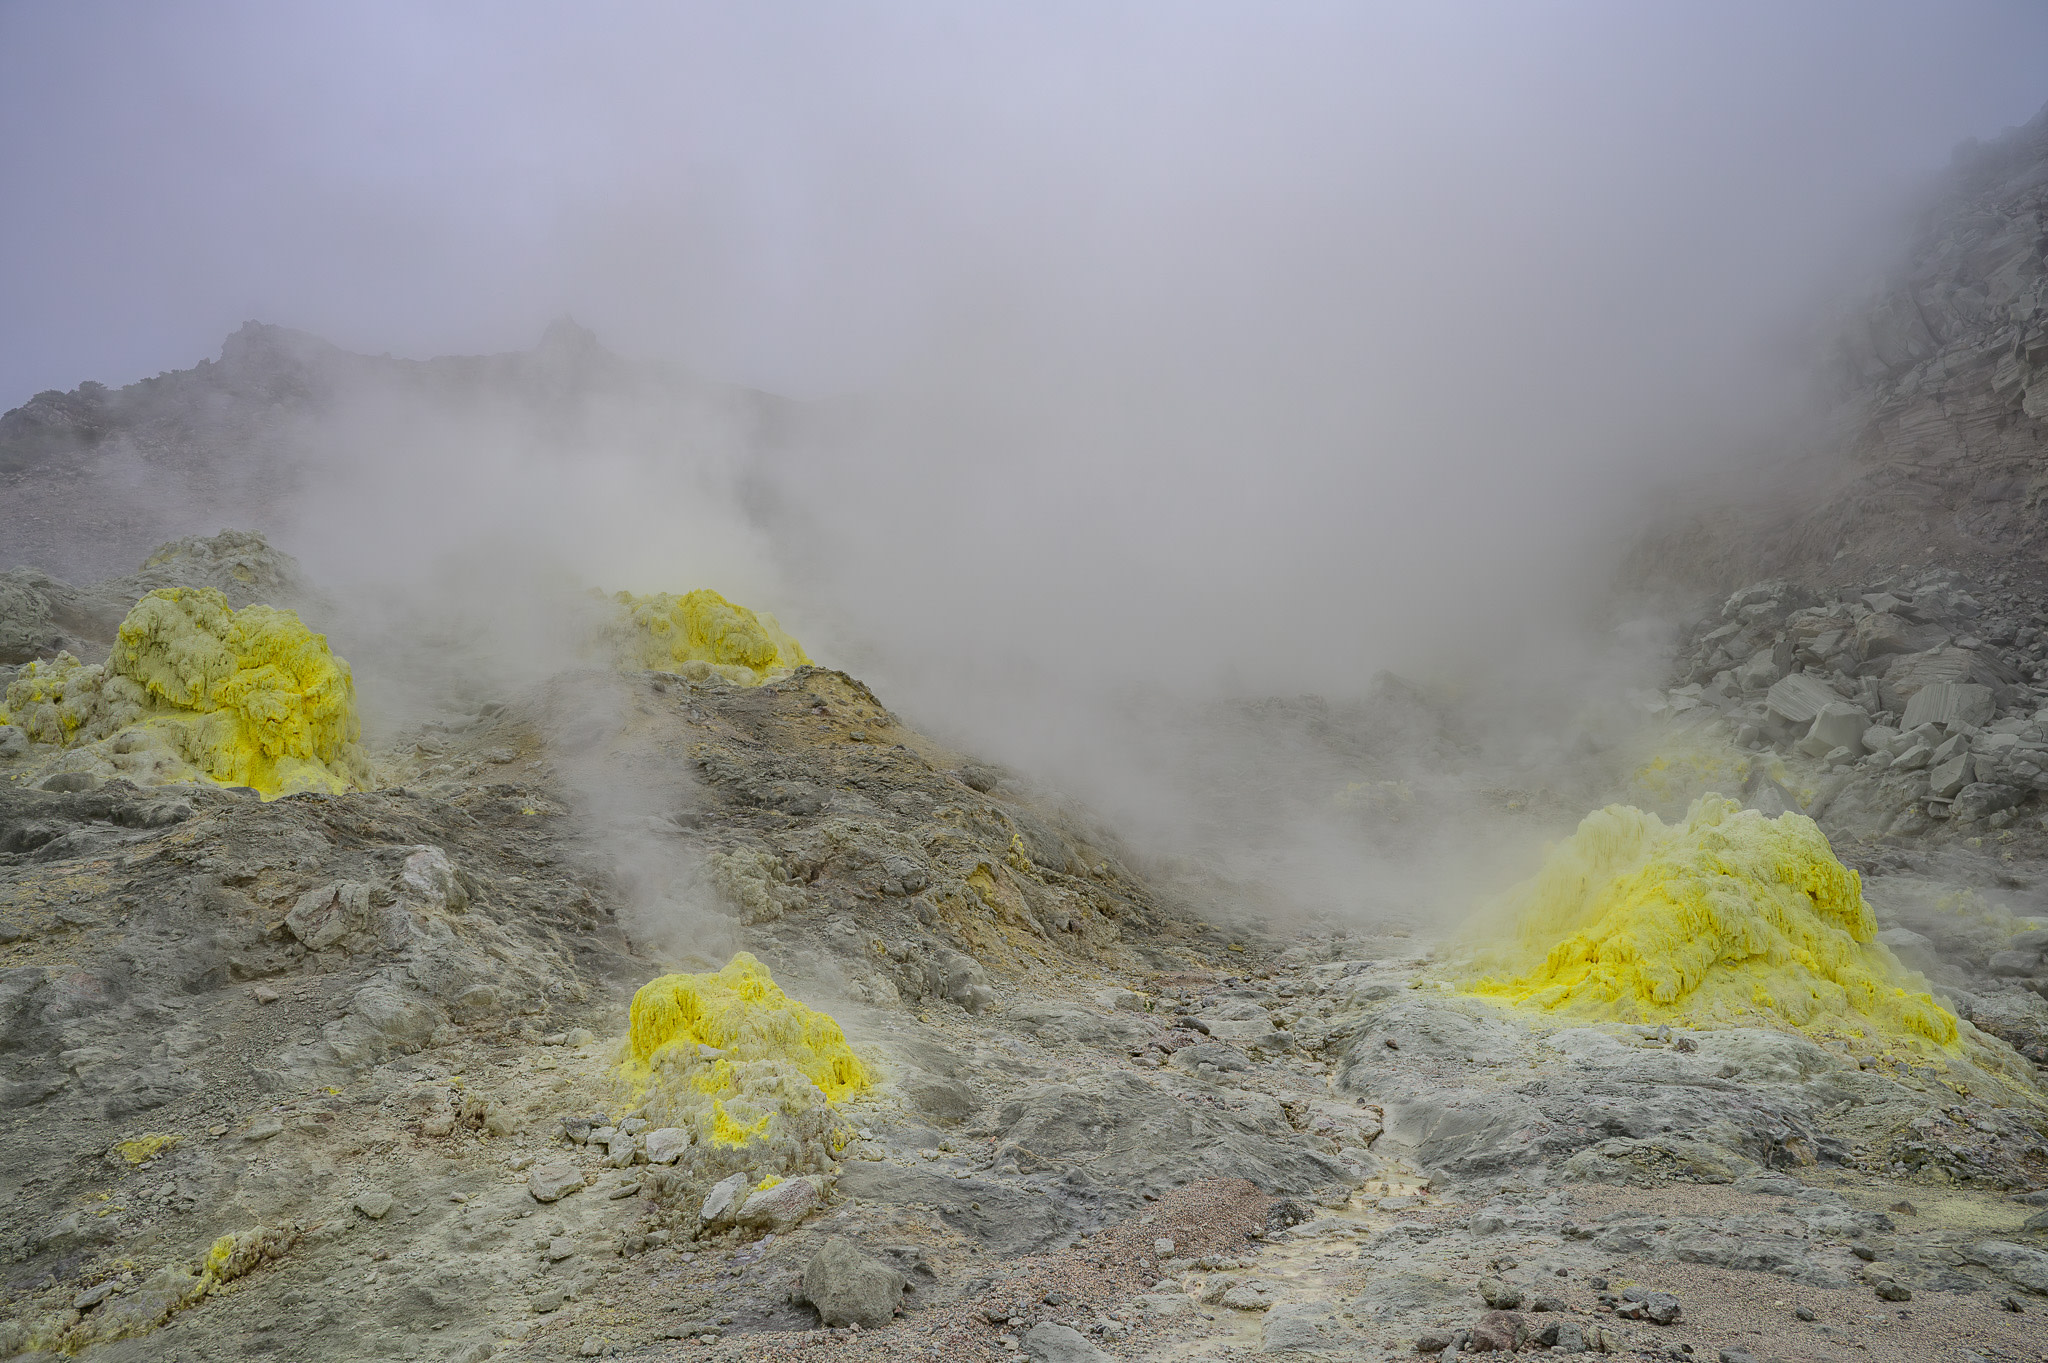 Several bright yellow fumaroles let out bellows of steam.